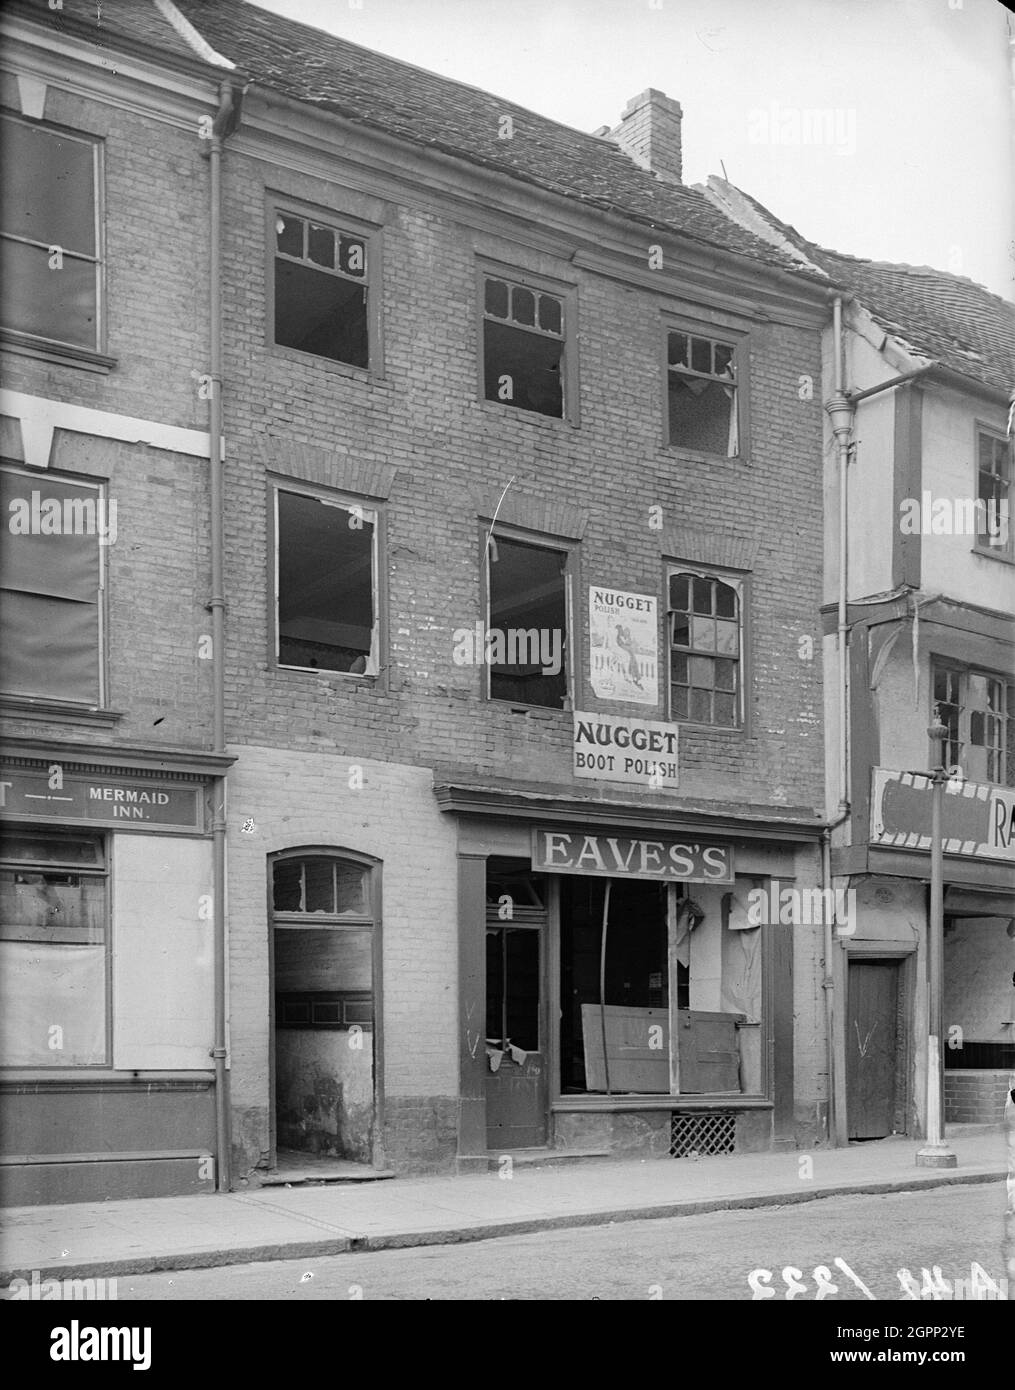 Gosford Street, Coventry, 1941. View showing part of the Mermaid Inn and the premises of Eaves's at 110 Gosford Street showing bomb damage. Coventry City centre was devastated by air raids on 14th November 1940. The bombing raids left the nearby cathedral in ruins and destroyed much of the historic fabric of the city. Stock Photo